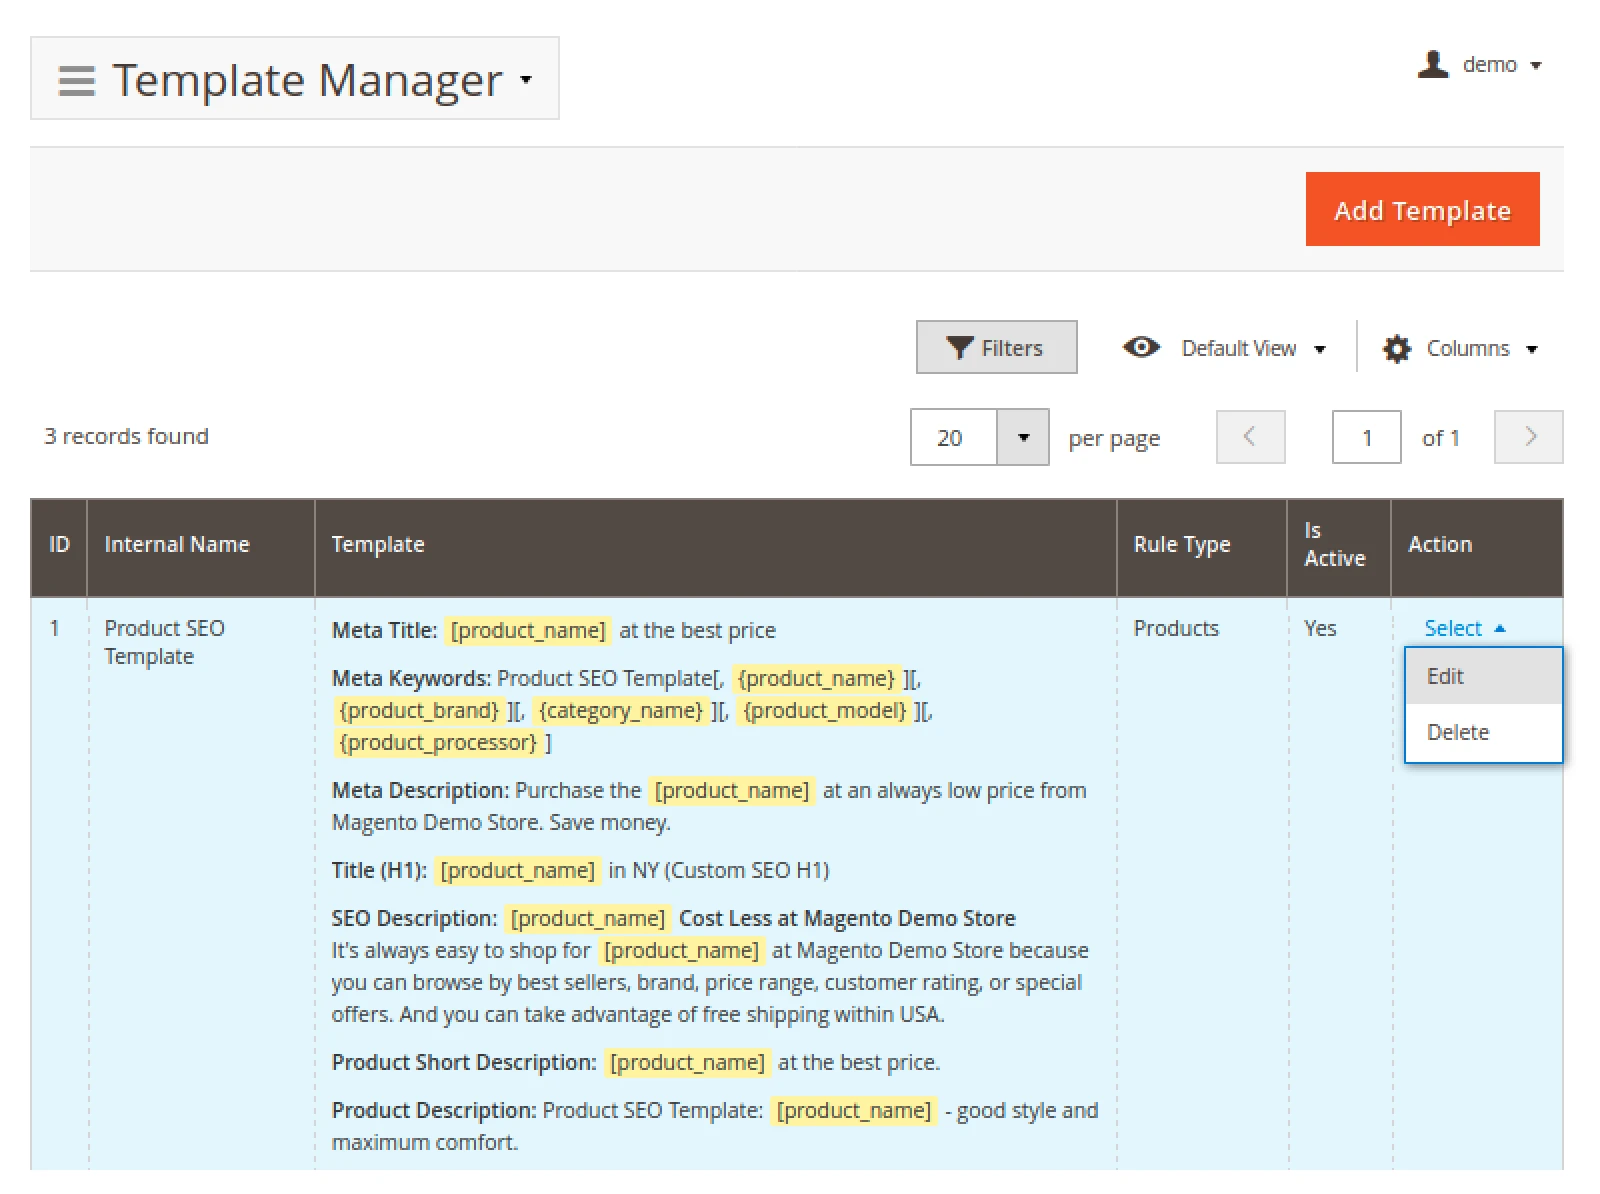 Mirasvit Advanced SEO Suite's Template Manager page